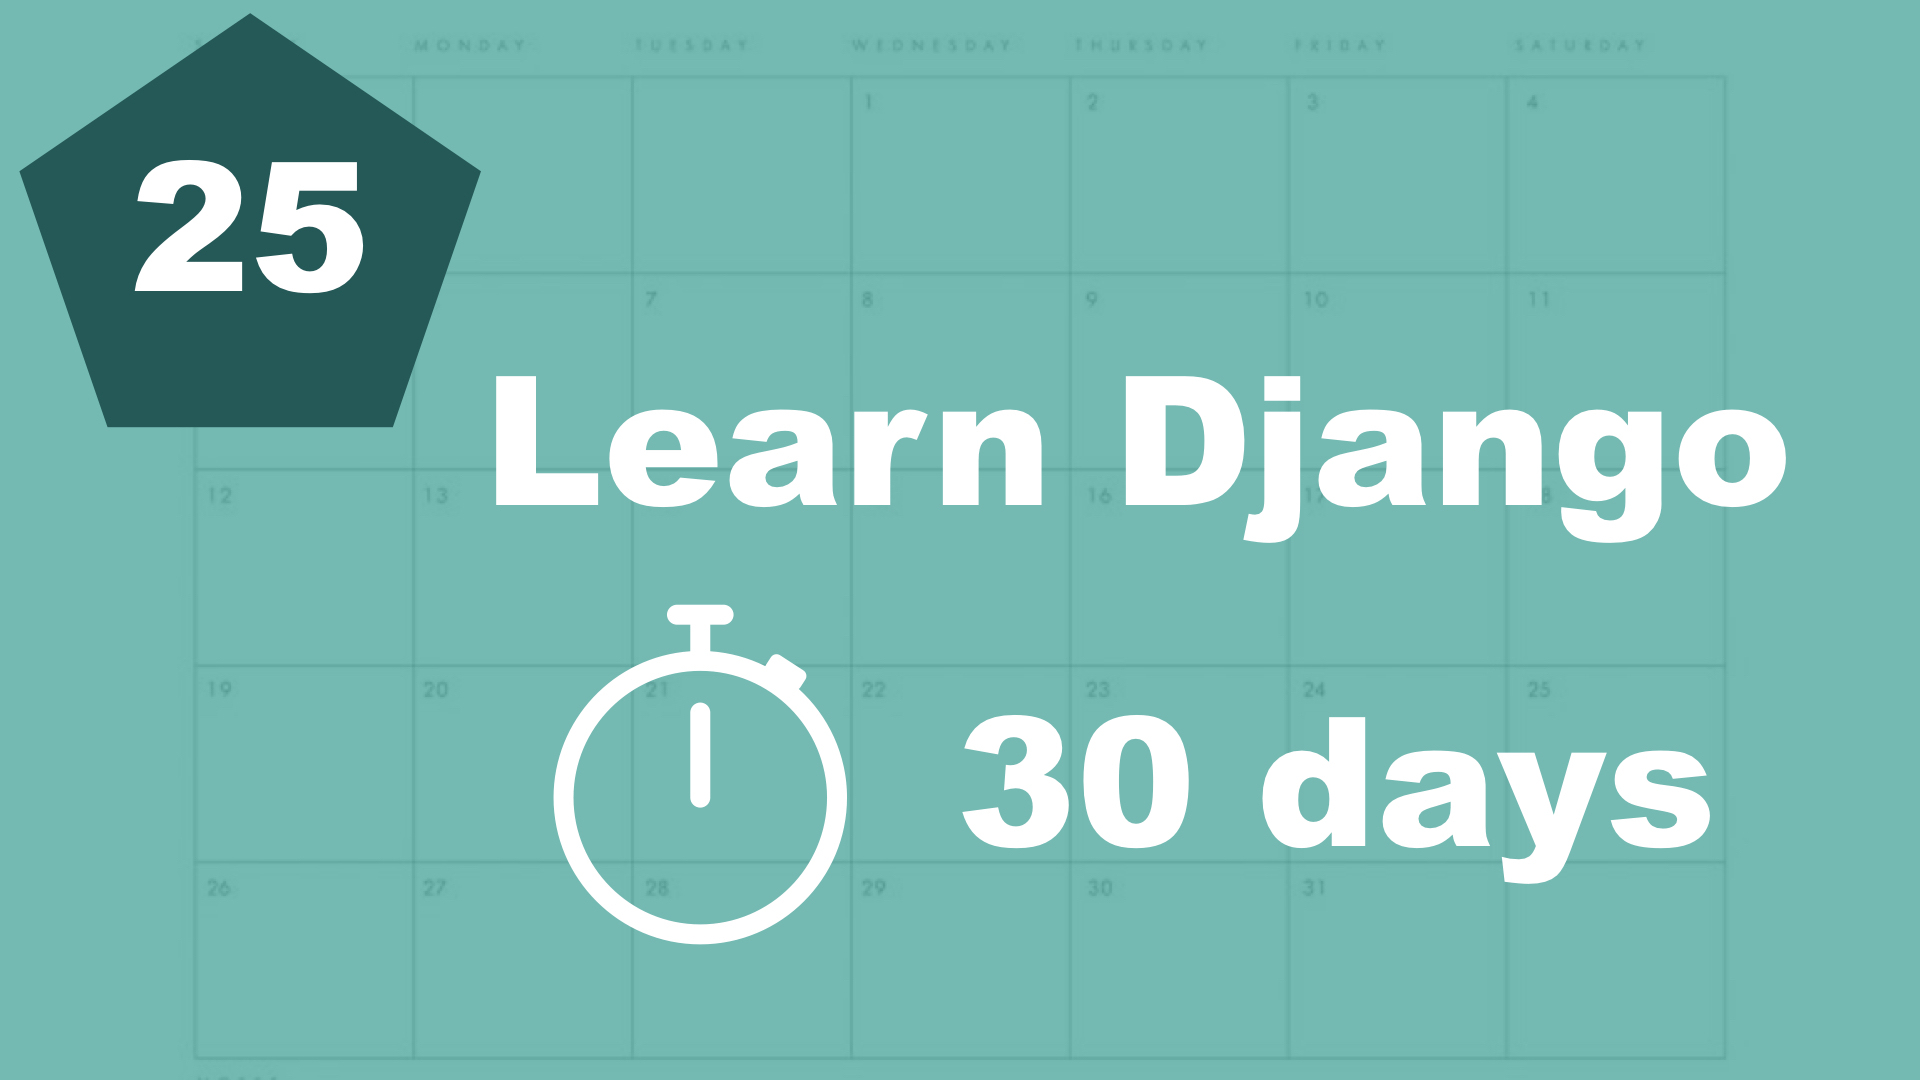 Show only your data - 30 days of Django